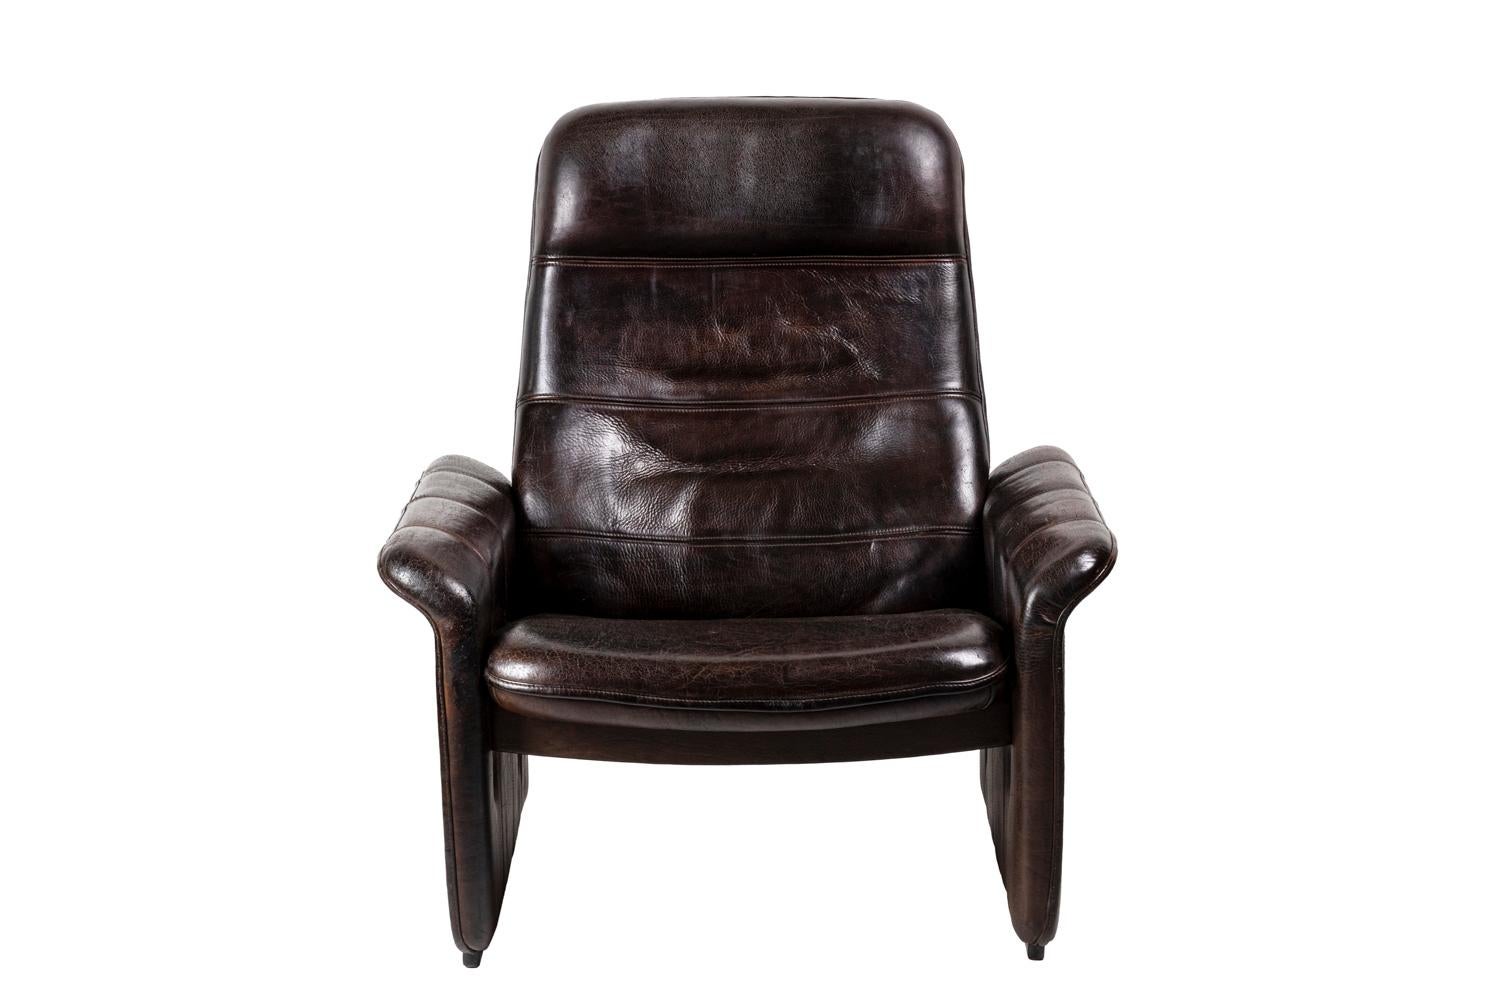 De Sede, attributed to.
DS-50 armchair with padded metallic structure covered by buff leather standing on two straight legs. Flaring arms towards the outside. Reclining back. Decor of topstitch.

Work realized in the 1970s.

The manufacturer De